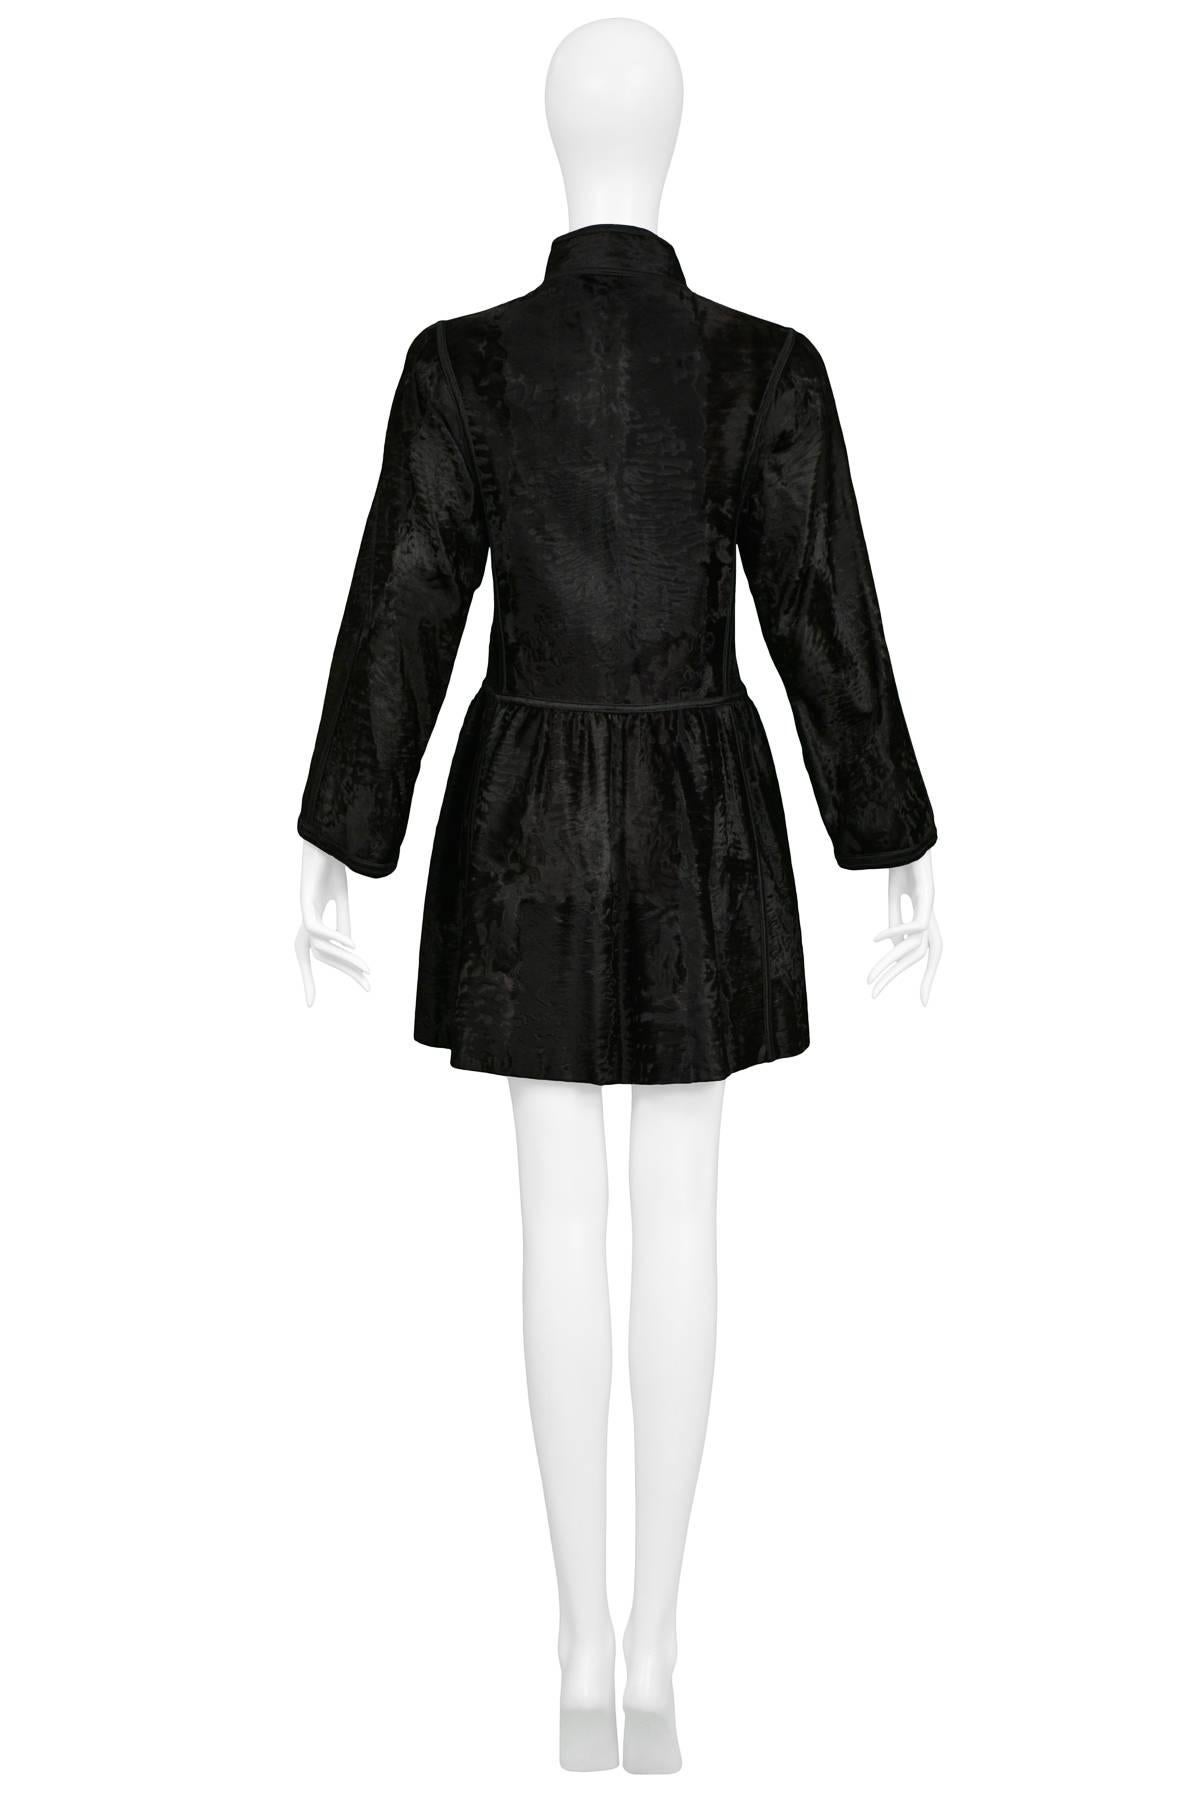 COUTURE RUSSIAN COLLECTION BLACK BROADTAIL COAT
Condition : Excellent Vintage Condition
Size : SMALL
A rare and important vintage Yves Saint Laurent couture 